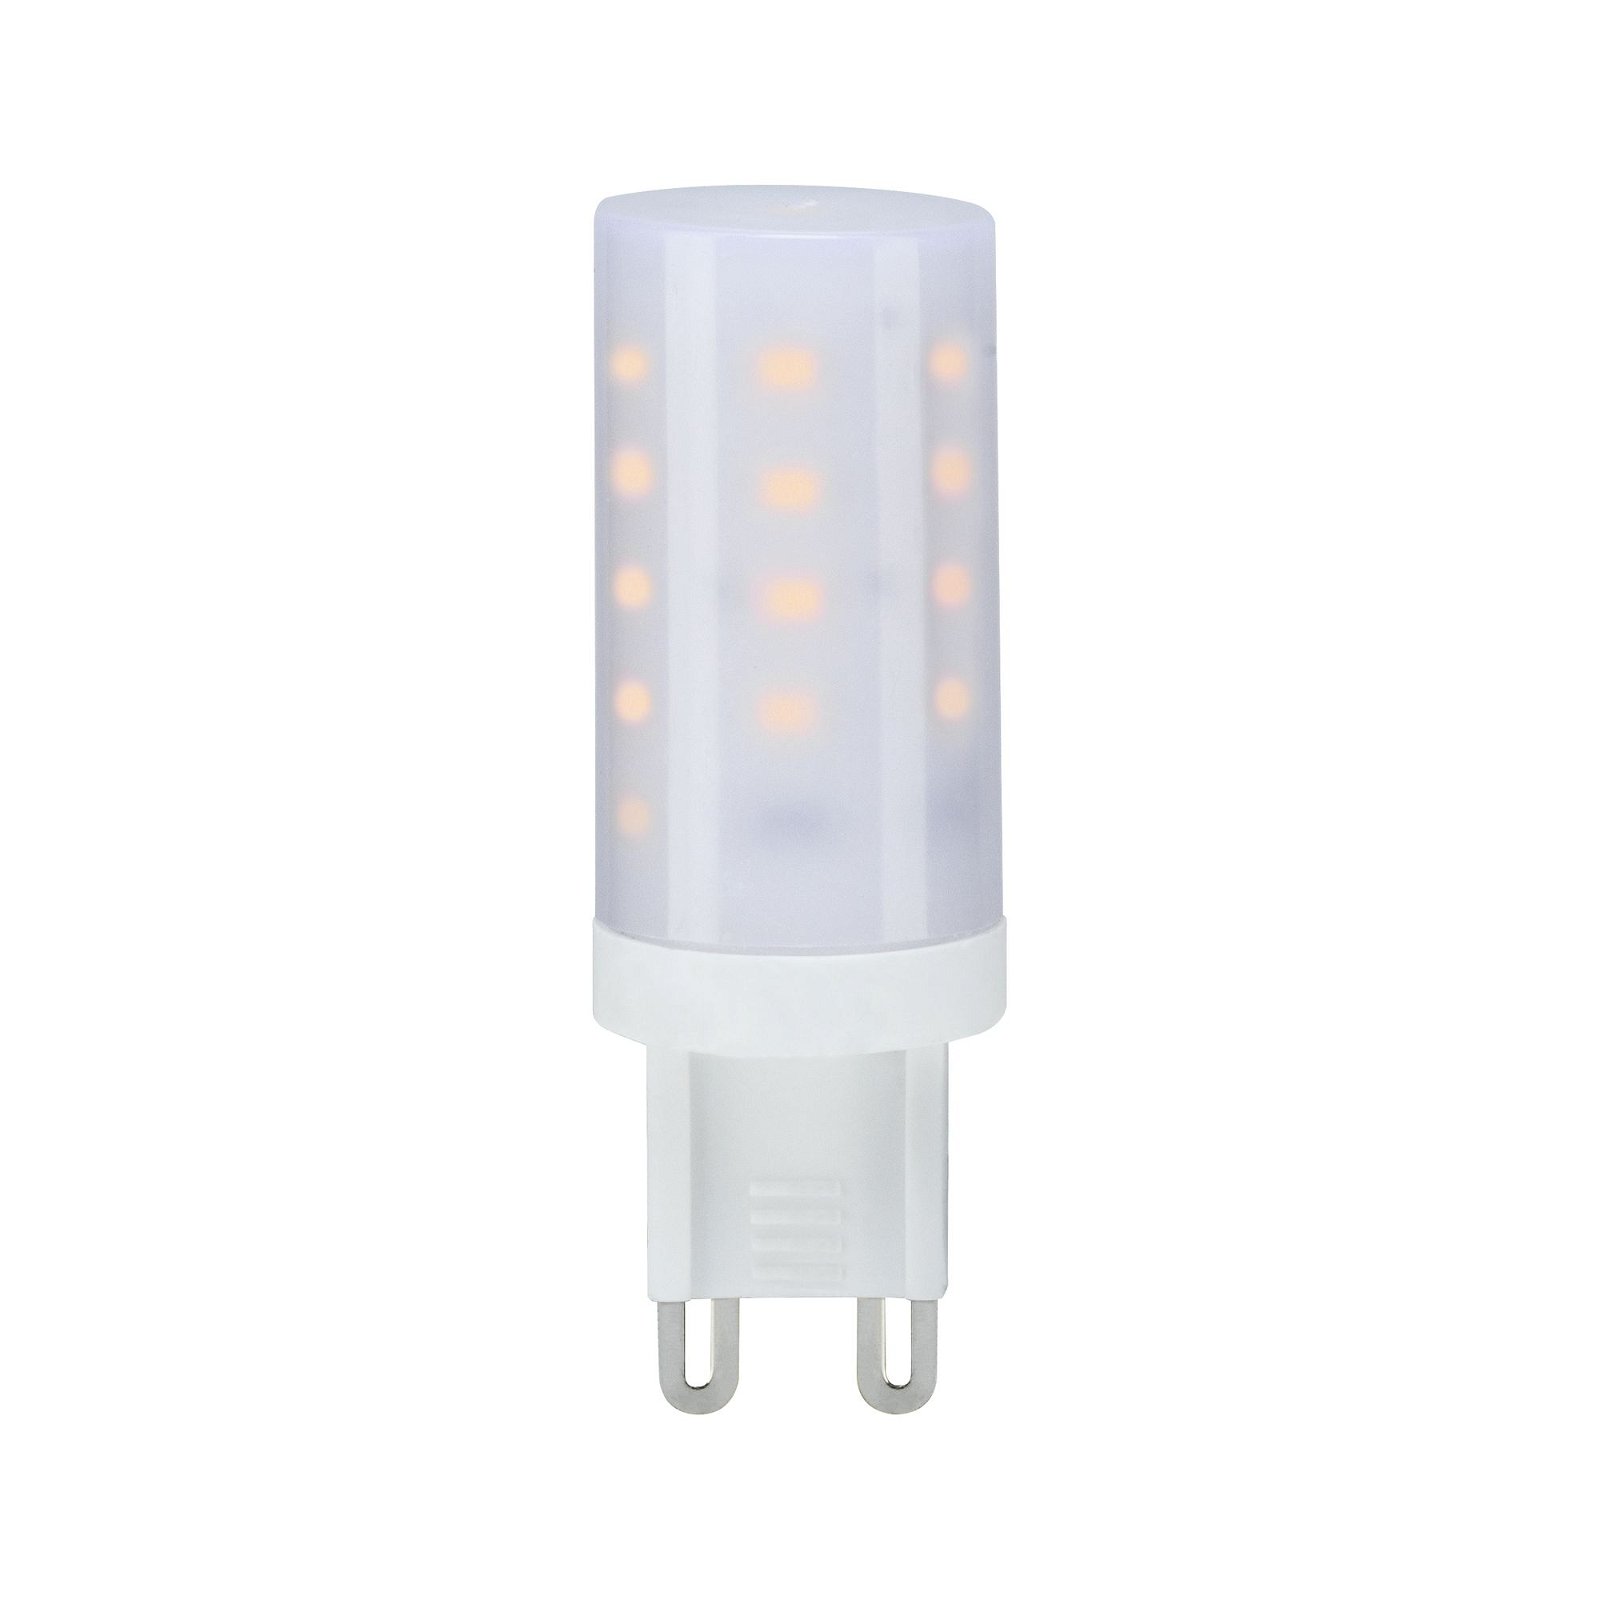 230 V Standard 3-Step-Dim LED Pin base G9 1 pack 350lm 4W 2700K dimmable Clear